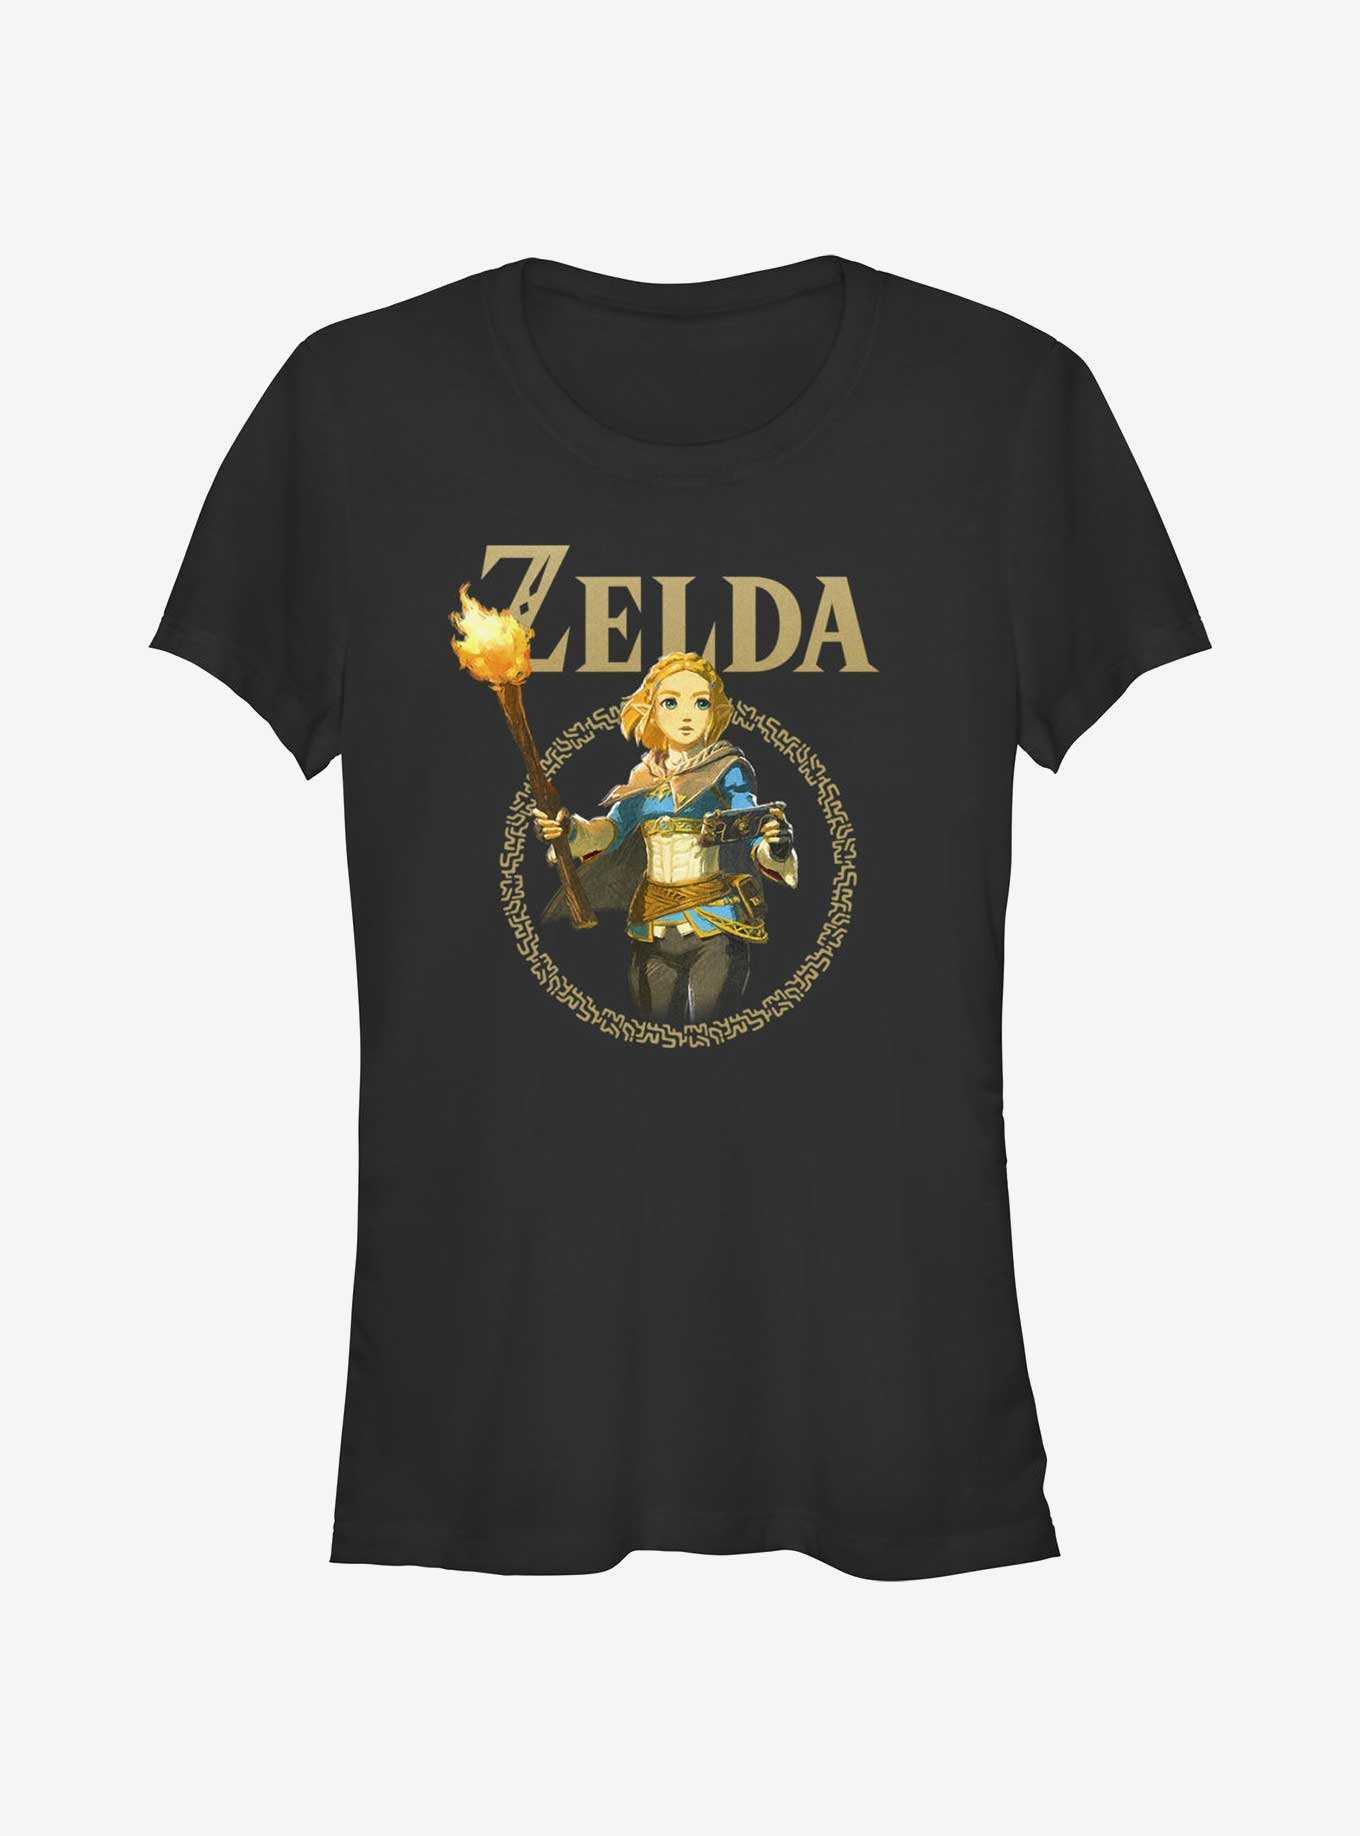 Friday Five: Legend of Zelda and 'Tears of the Kingdom' Merch